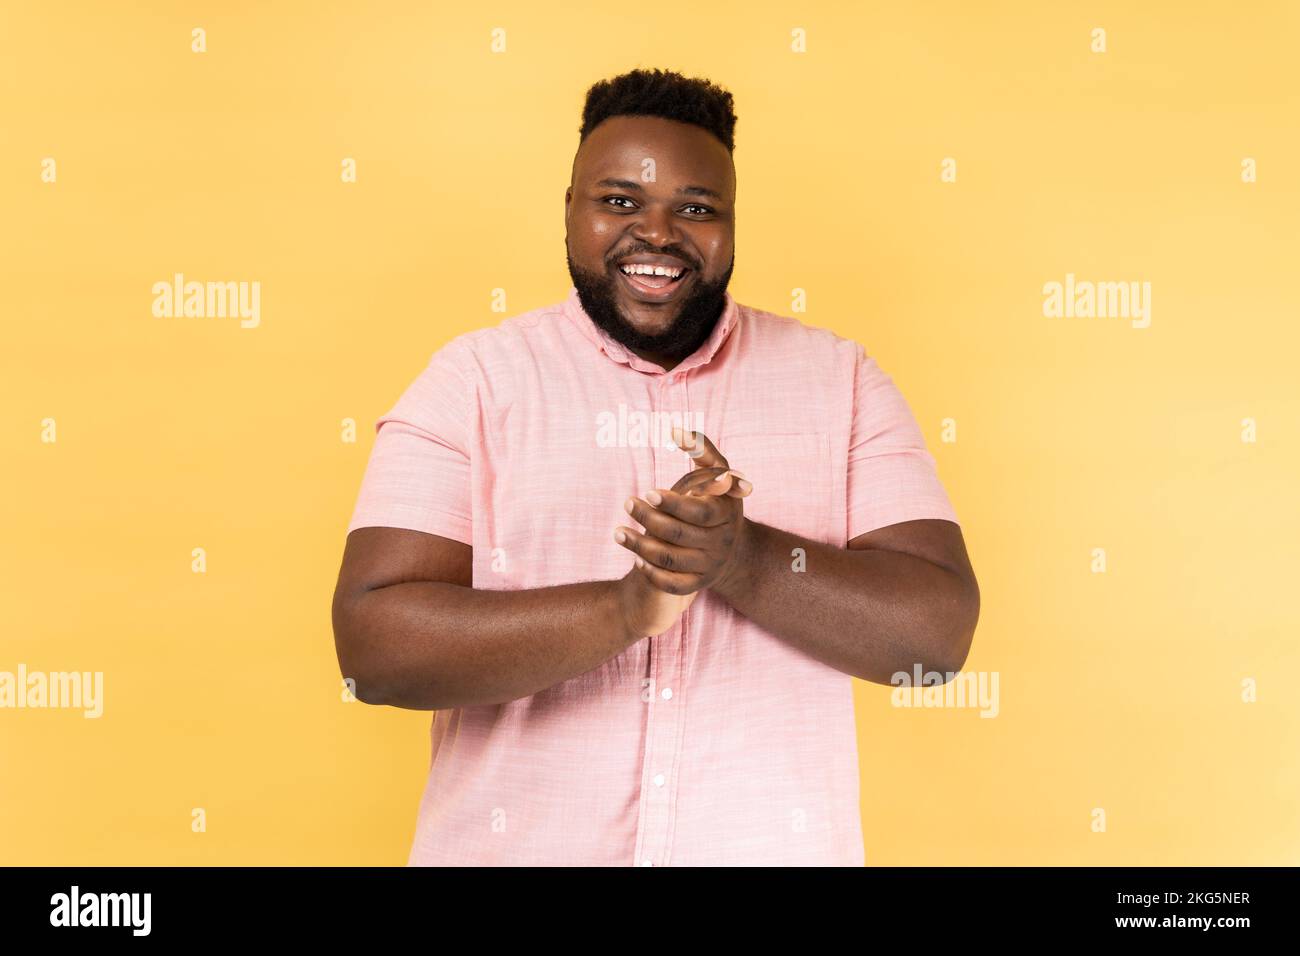 Portrait of positive friendly man wearing pink shirt standing with palms together, applauding, clapping hands congratulating you with victory. Indoor studio shot isolated on yellow background. Stock Photo